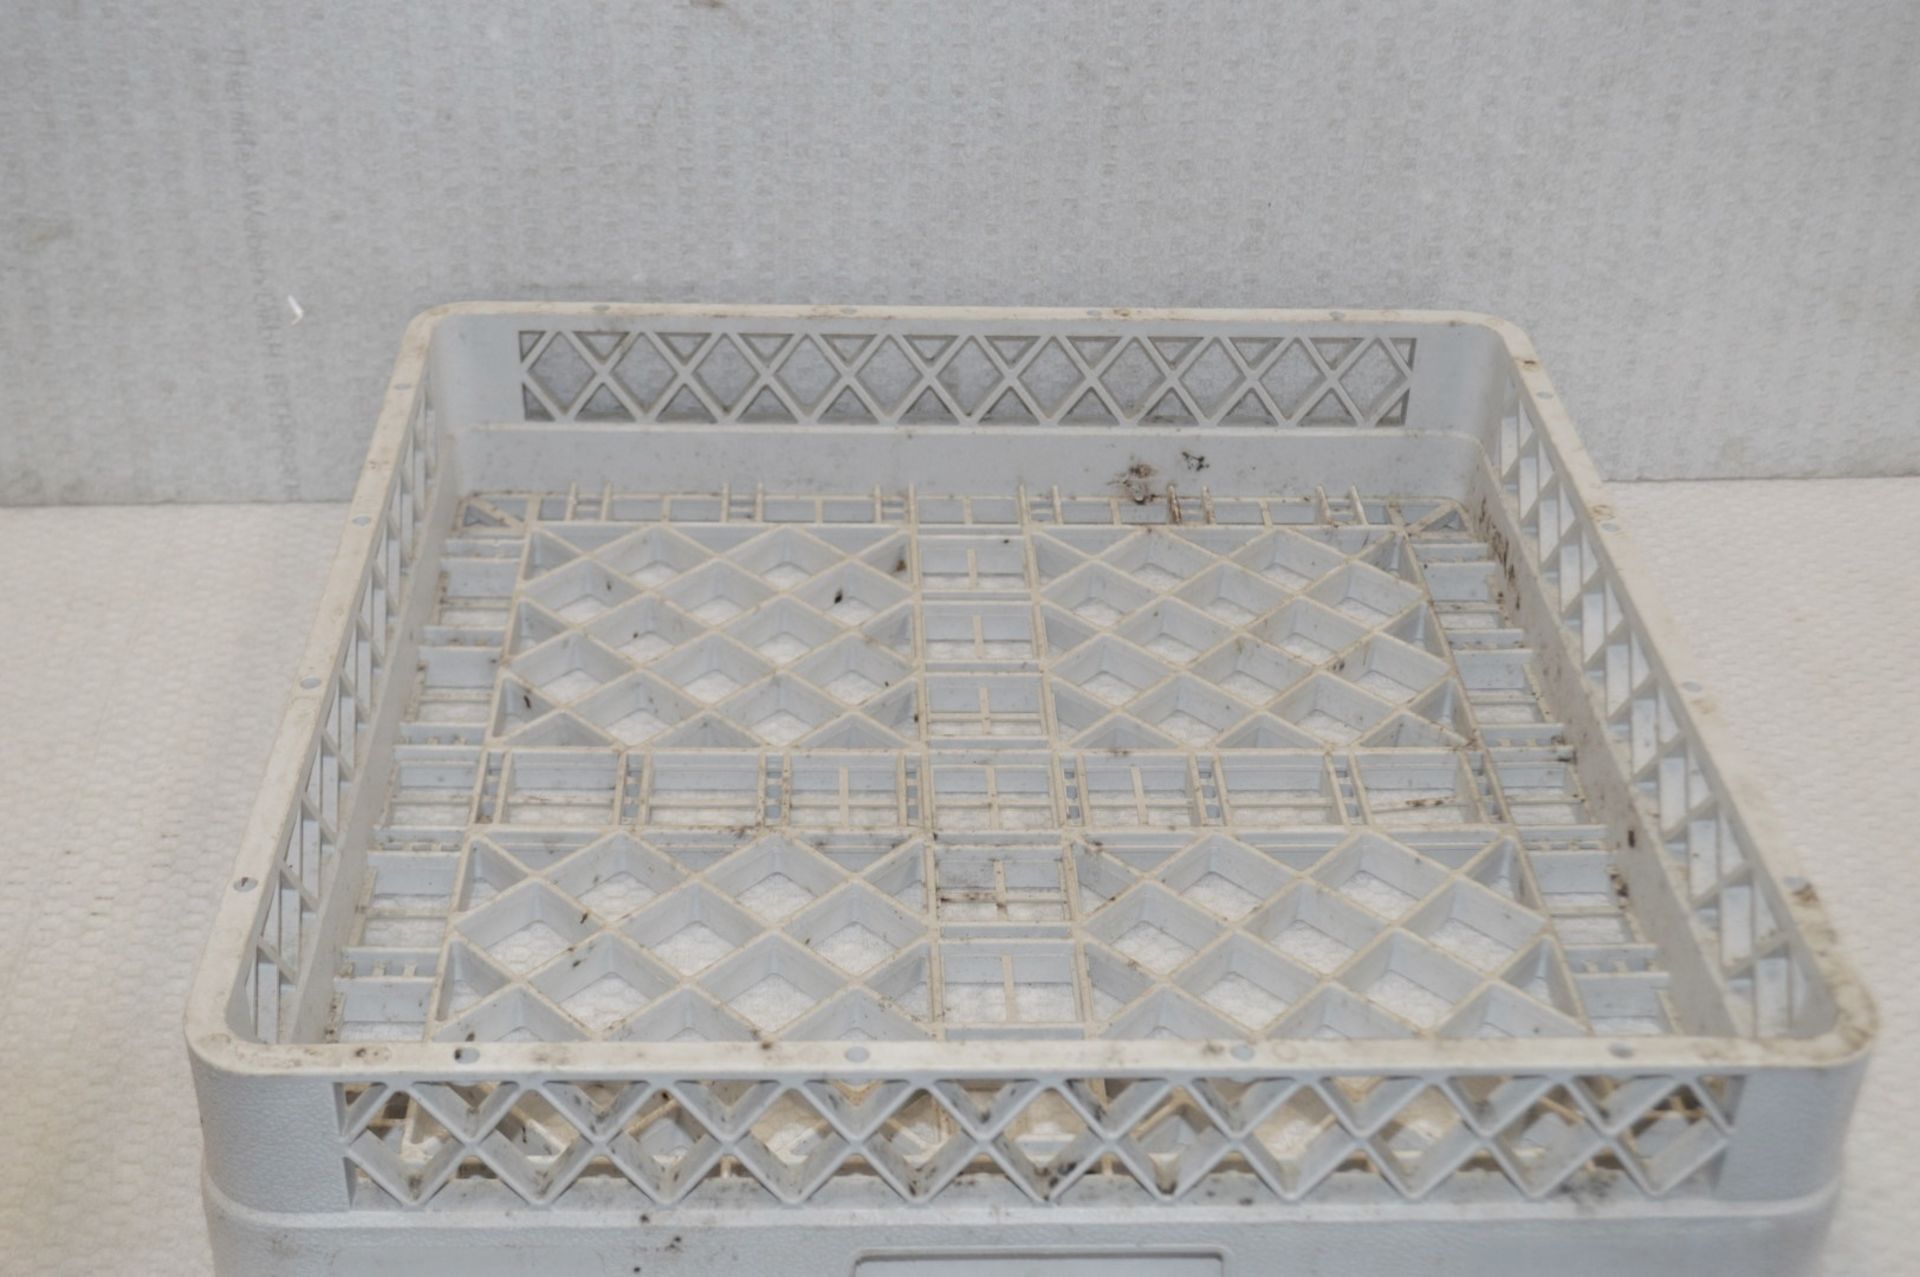 12 x Commercial Dishwasher Trays - Suitable For Most Commercial Dishwashers - Recently Removed - Image 2 of 3